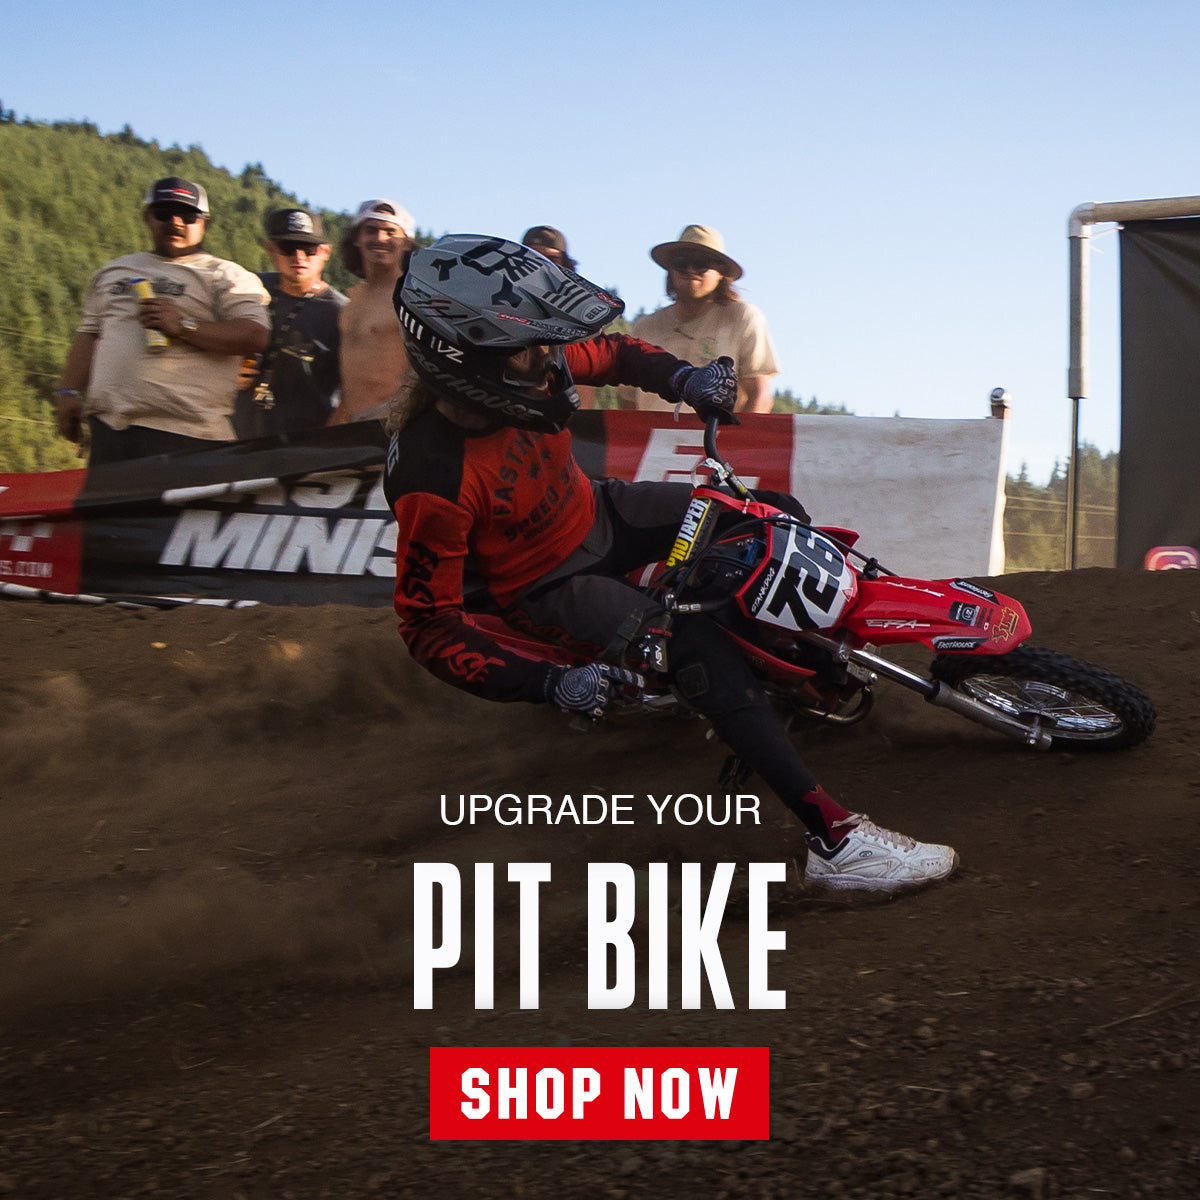 Pit Bike Performance and Aftermarket Parts